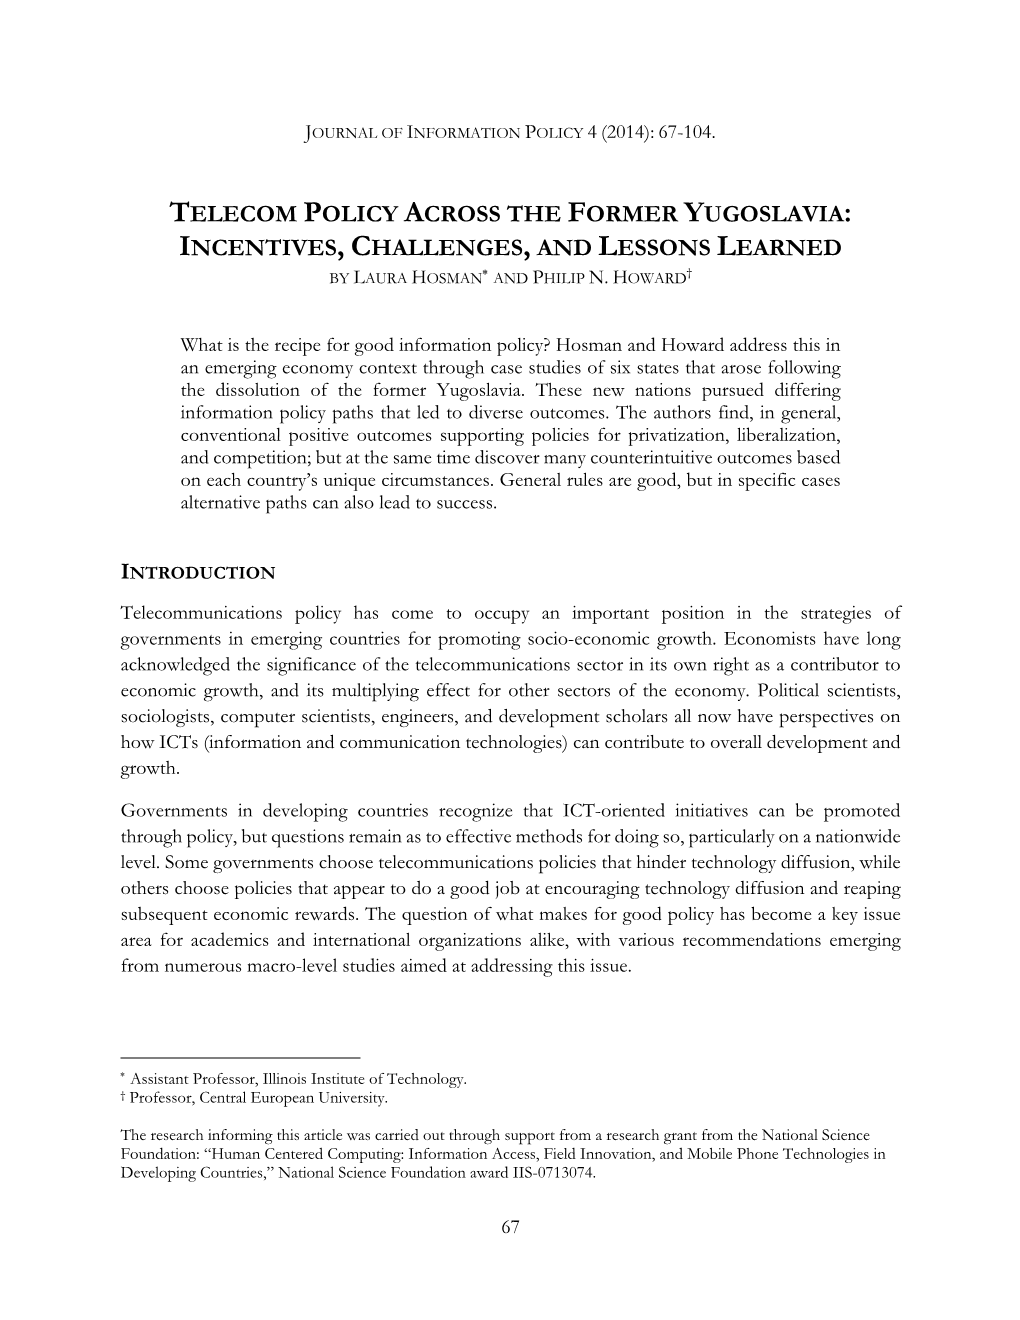 Telecom Policy Across the Former Yugoslavia: Incentives, Challenges, and Lessons Learned by Laura Hosman and Philip N